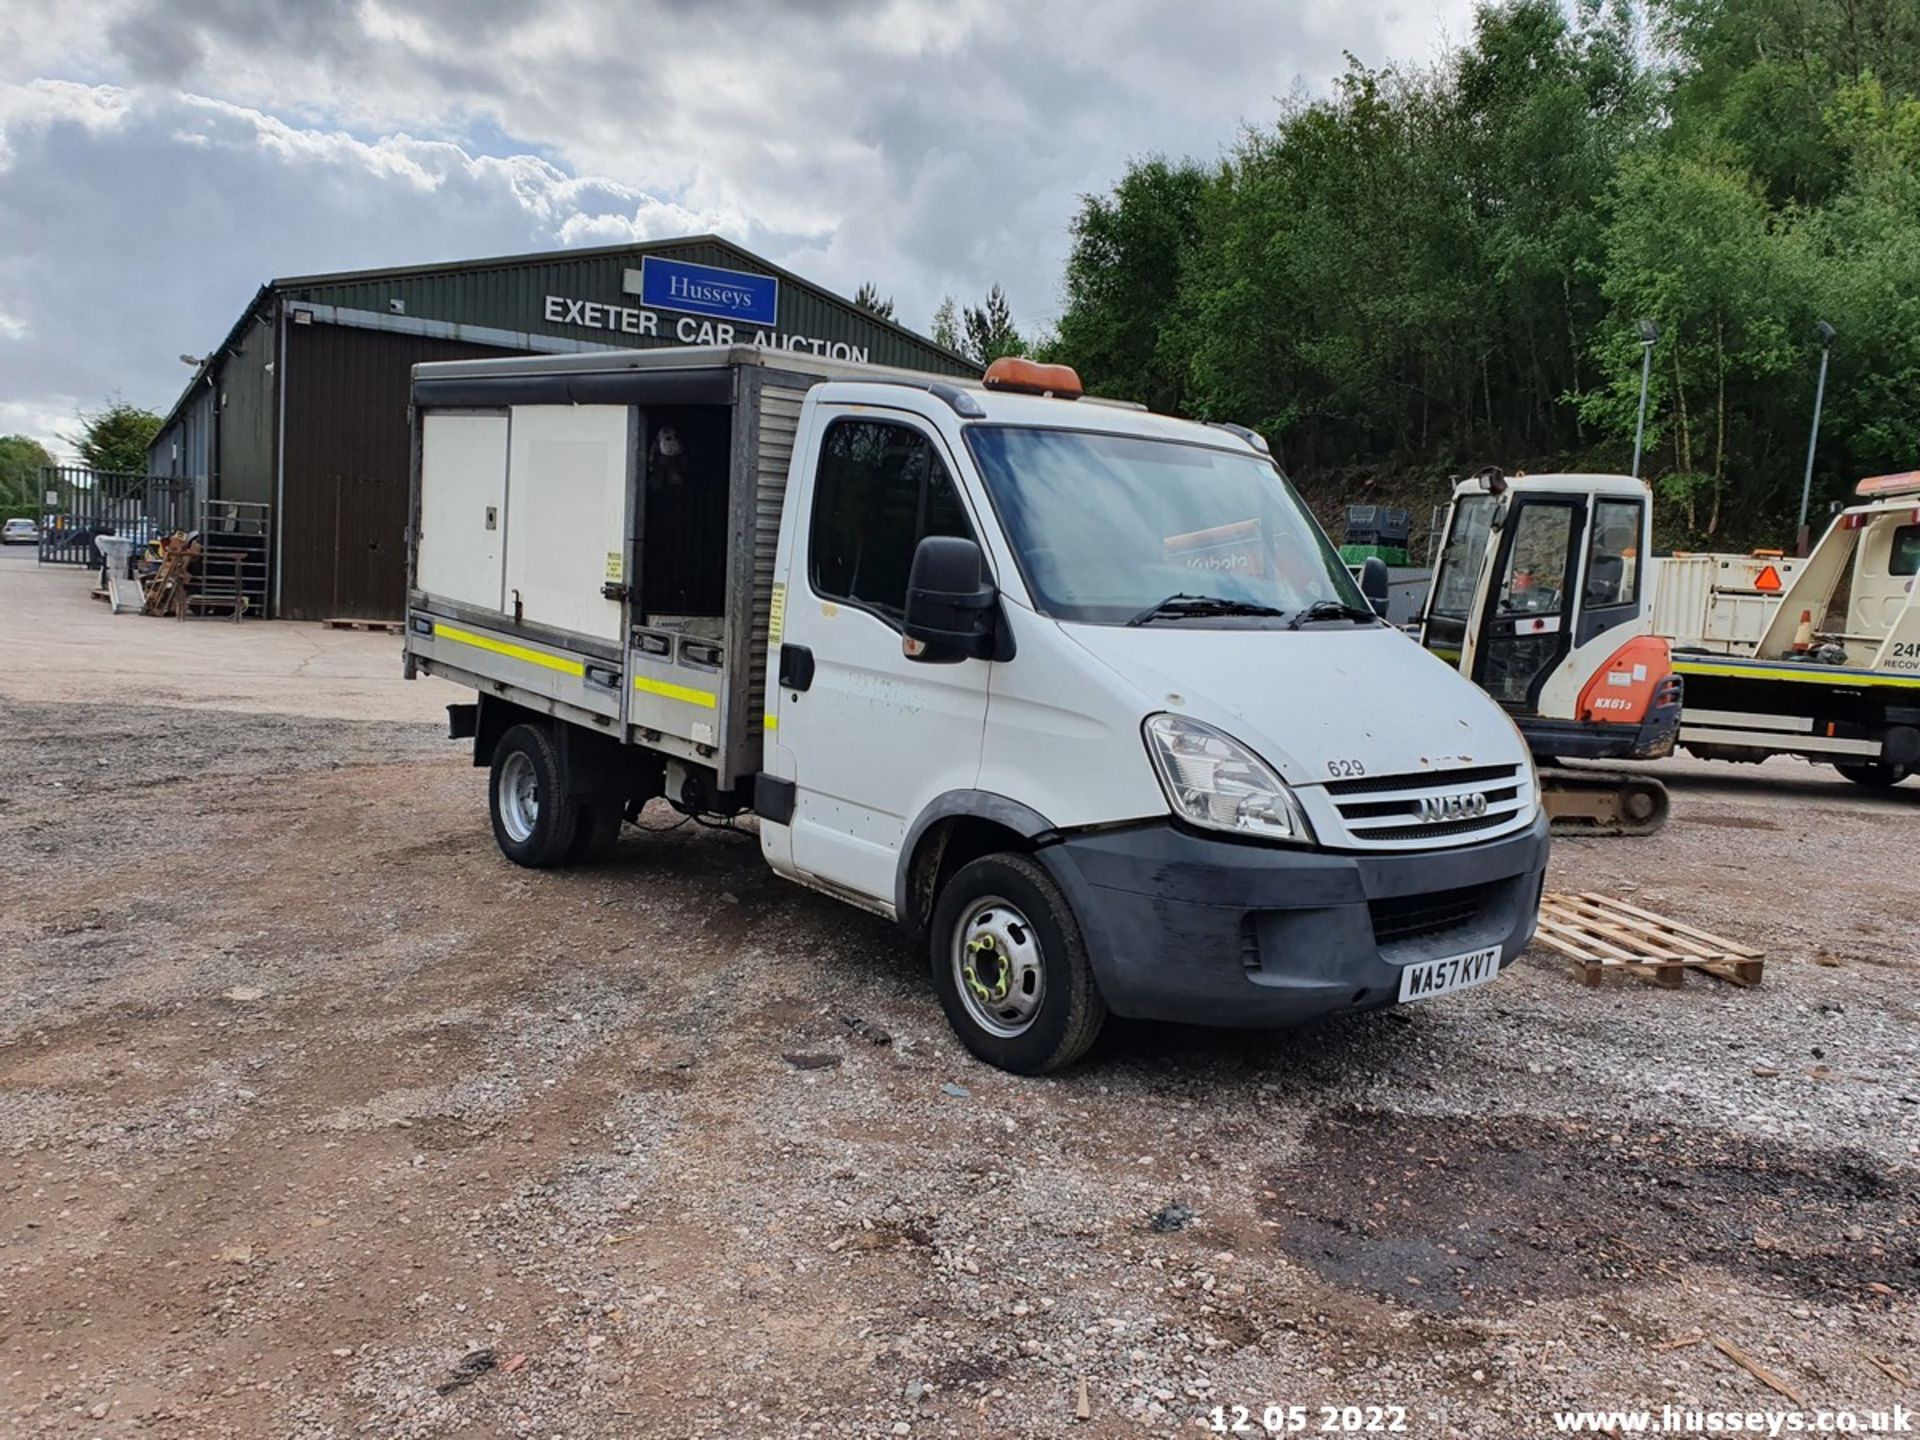 07/57 IVECO DAILY 35C15 MWB - 2998cc 2dr Tipper (White, 212k) - Image 2 of 21